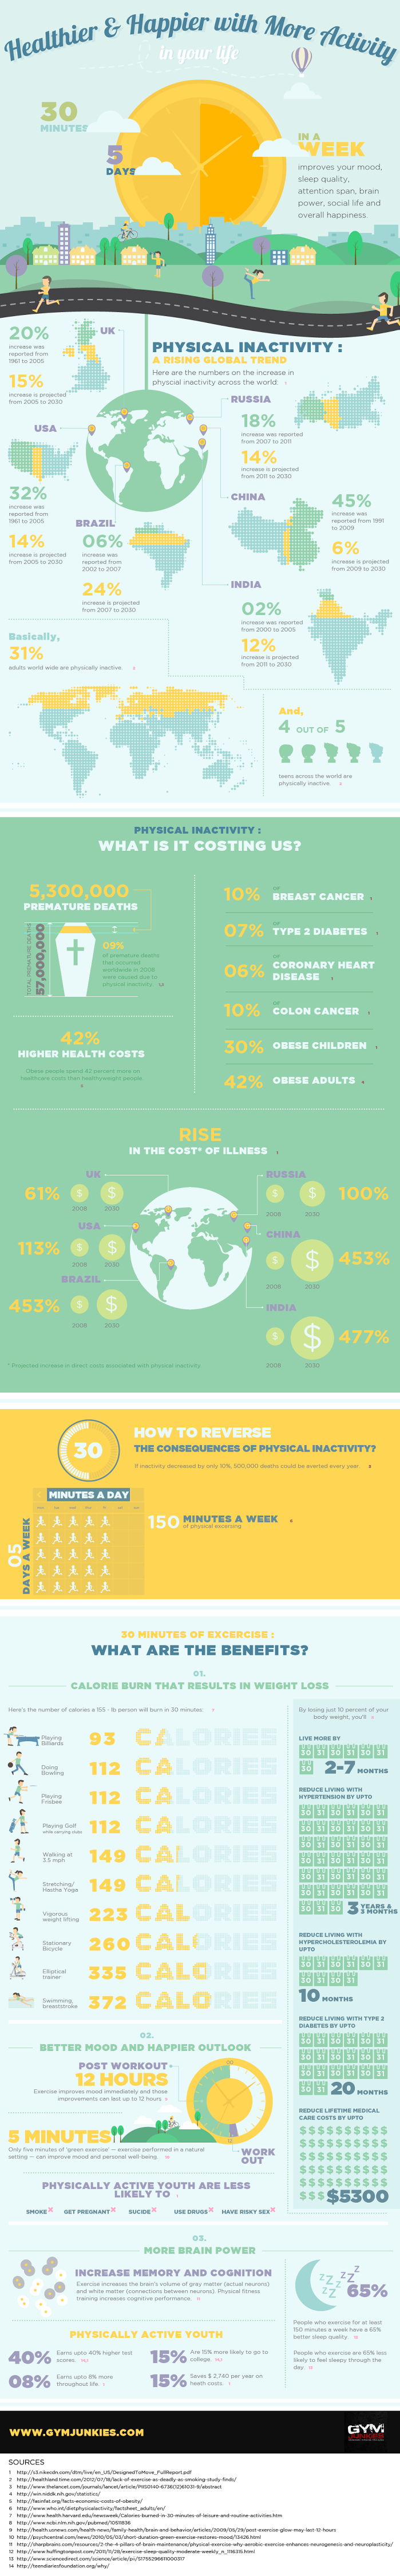 Infographic: Healthier and Happier With More Activity In Your Life